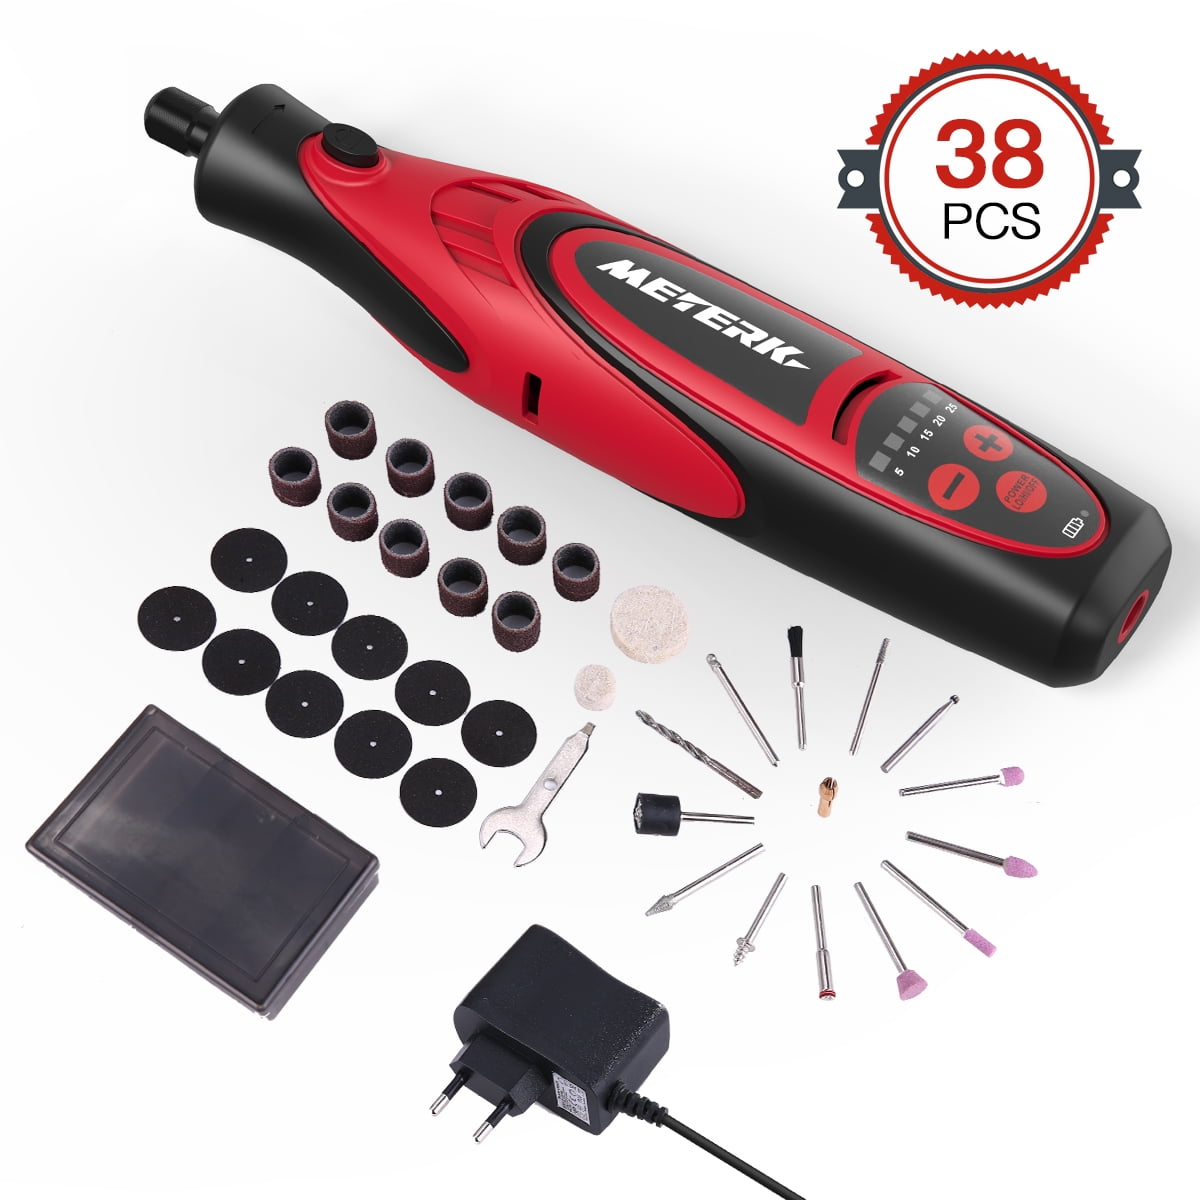 Craft Projects Sanding Rotary Tool Kit Meterk 160W Rotary Tool with Flex shaft 6-Speed Drilling Perfect for DIY Creations 8000-35000rpm Cutting Polishing and Engraving 83pcs Accessories